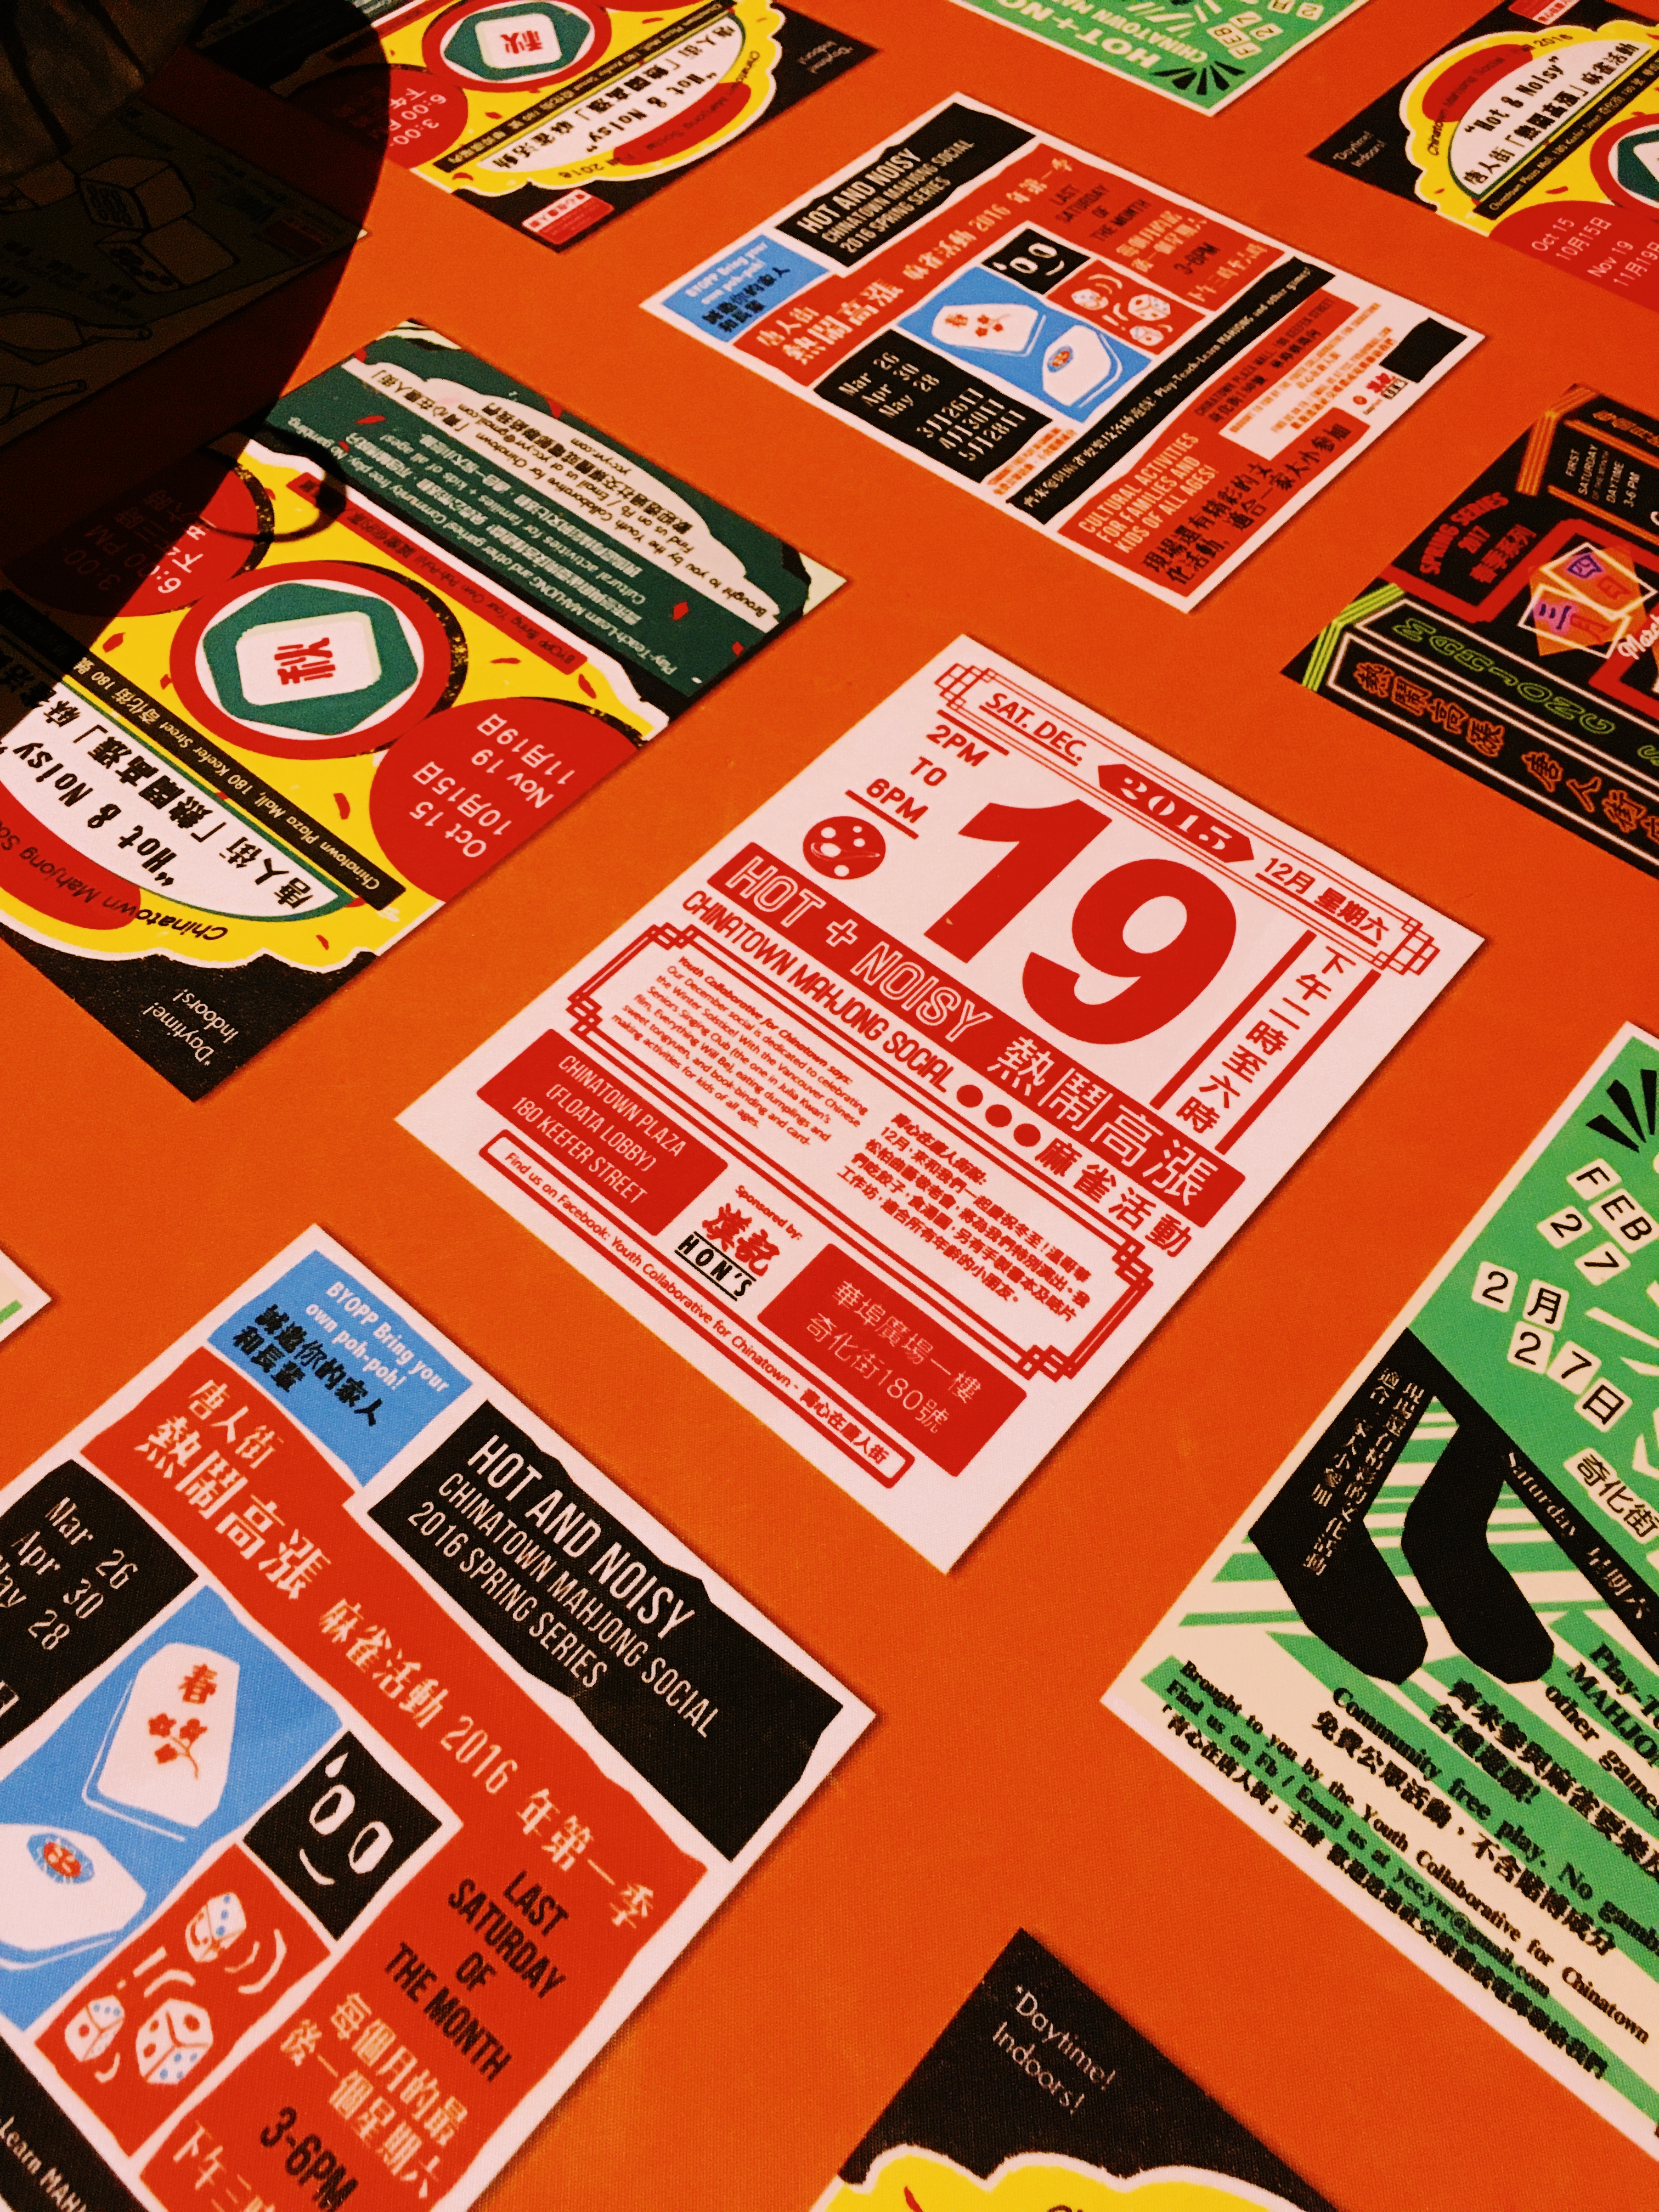 A bunch of event posters in English and Chinese, featuring bold graphic design, on top of a bright orange tablecloth.